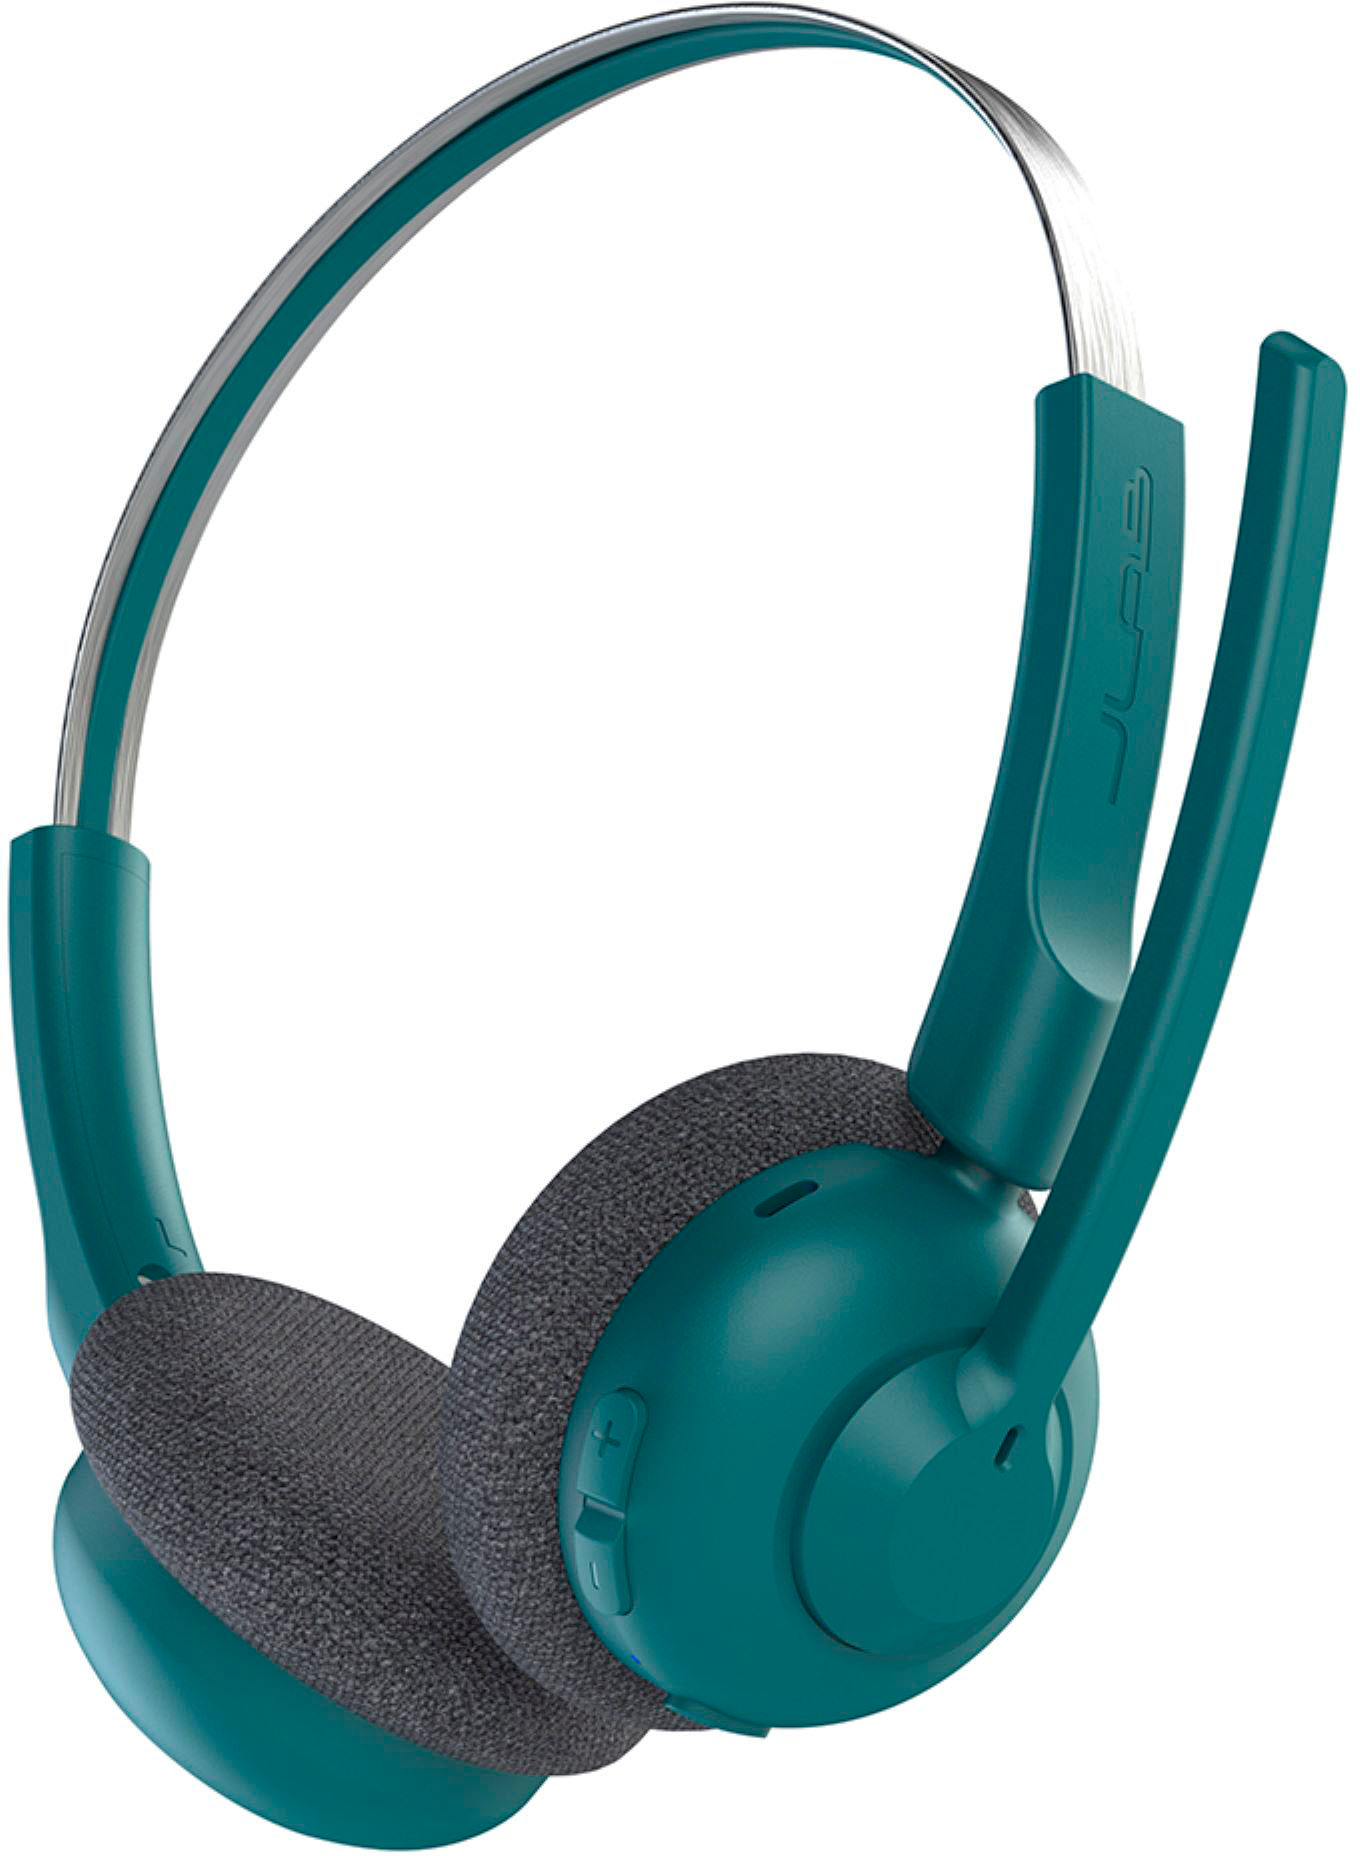 Angle View: Logitech - Zone 300 Wireless Bluetooth On-ear Headset With Noise-Canceling Microphone - Rose